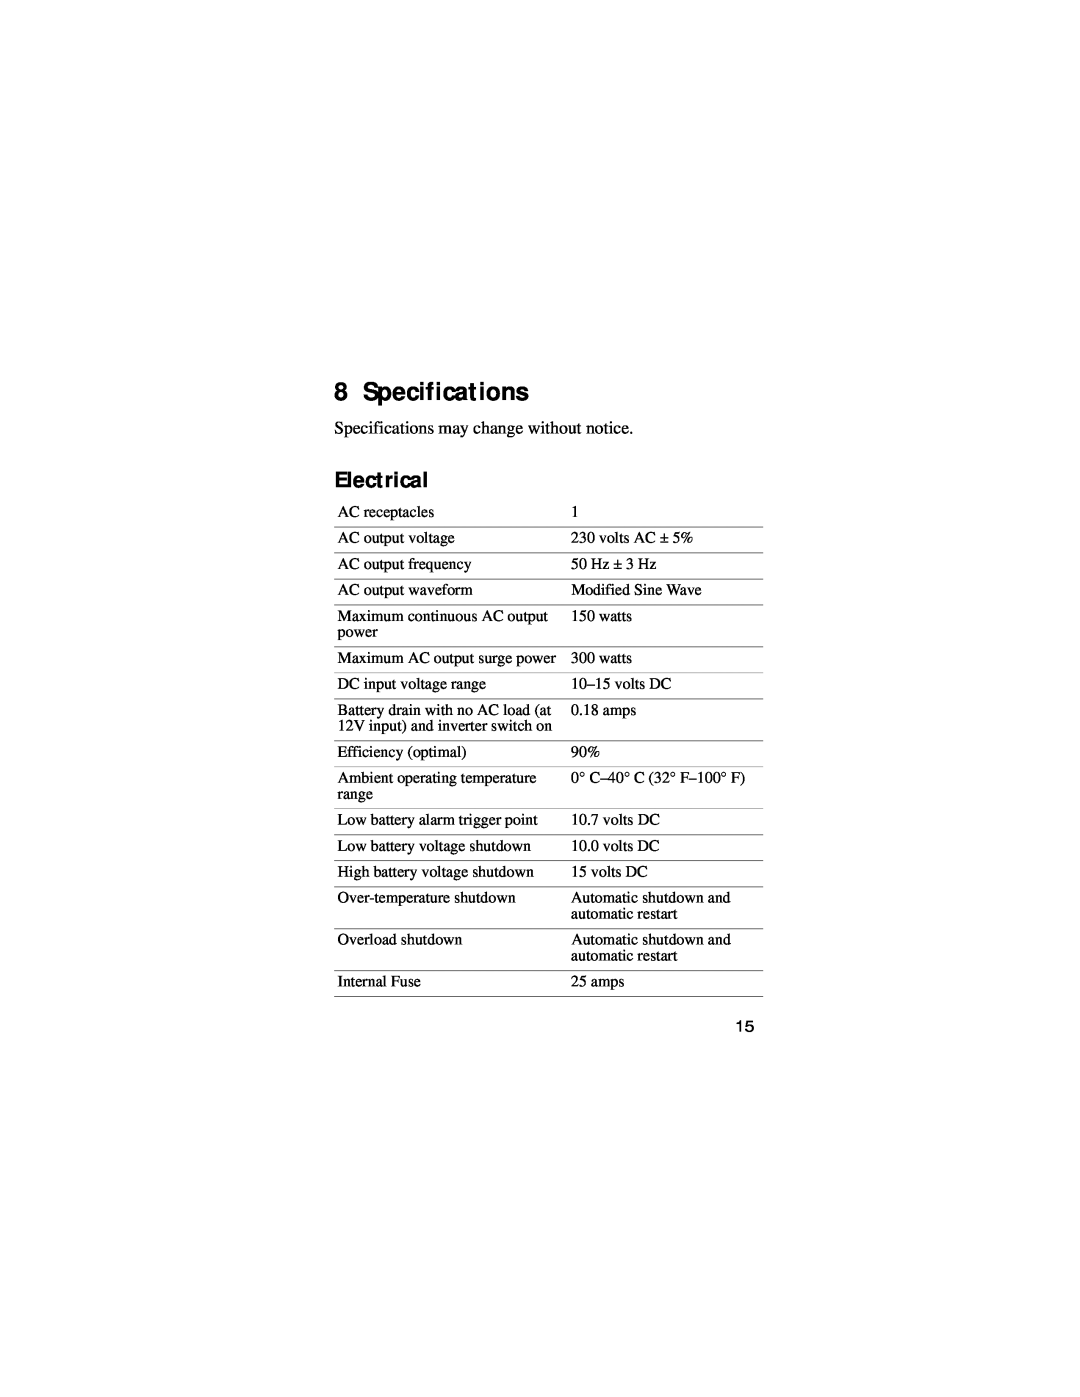 Xantrex Technology 150 manual Specifications, Electrical 